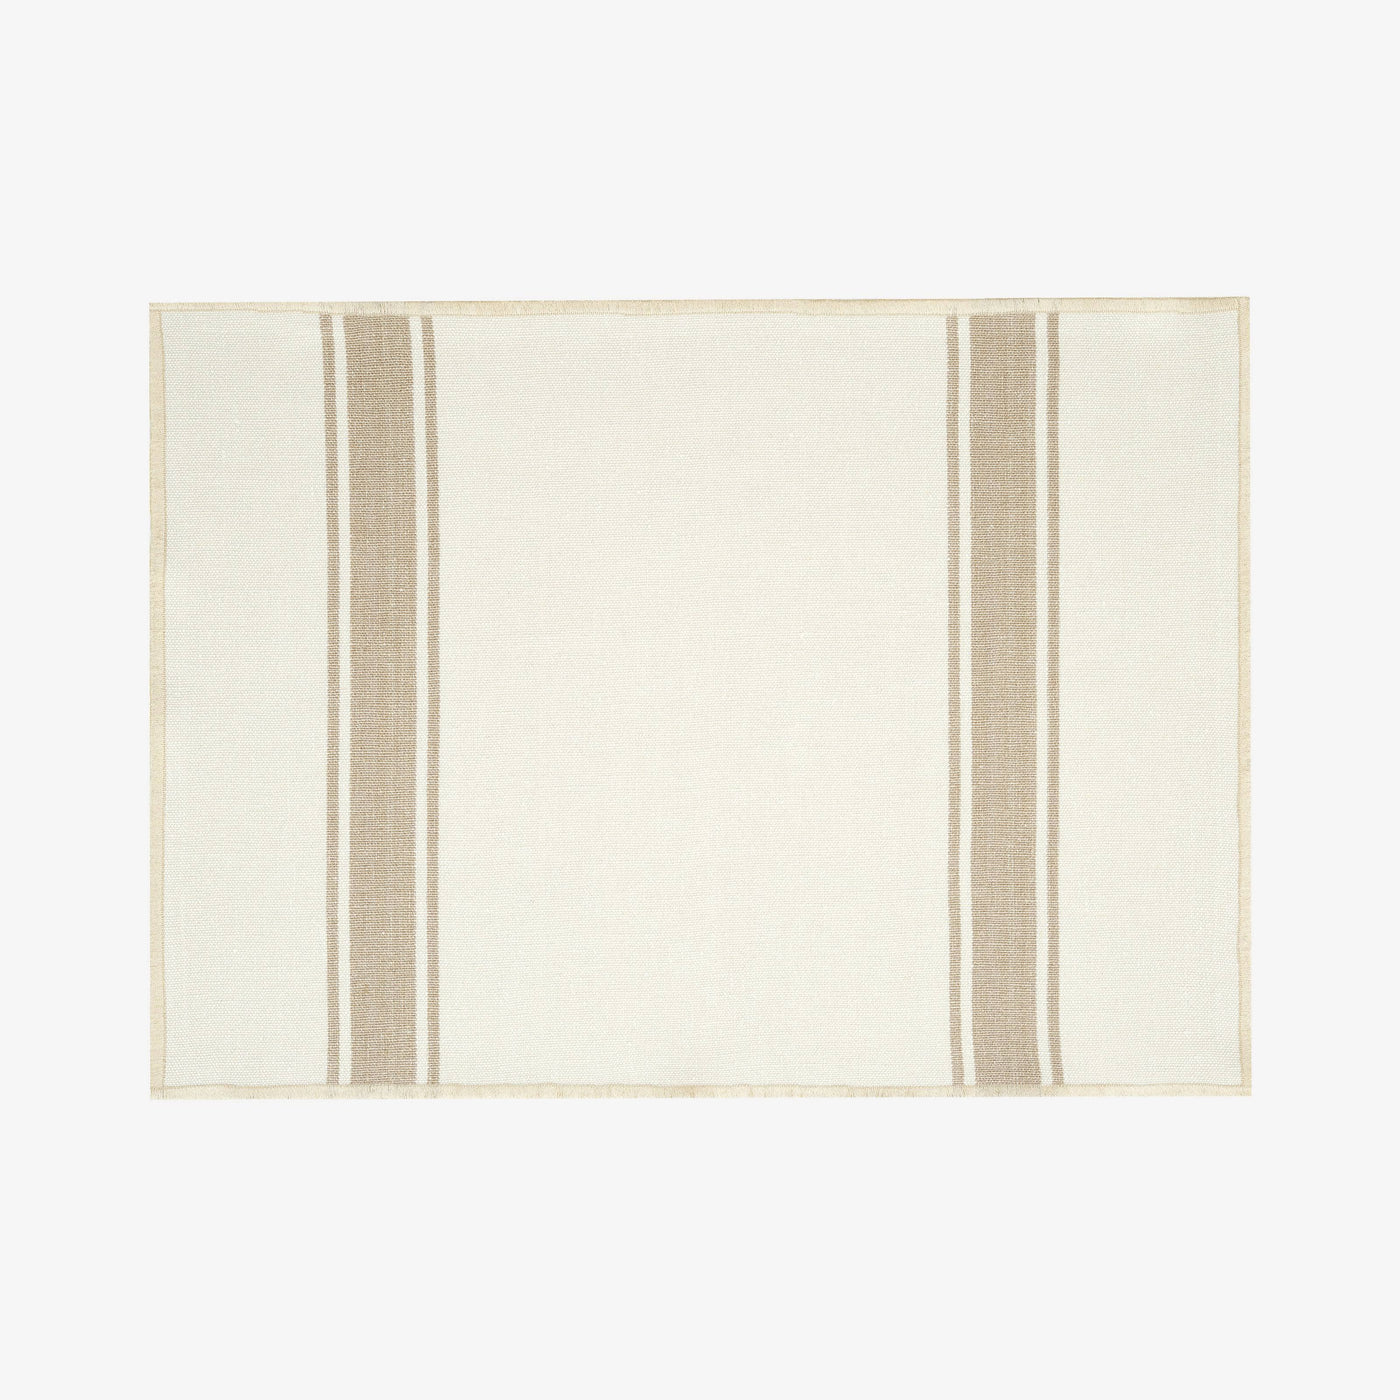 Mary Set of 2 Striped Placemats, Natural - Beige, 35x46 cm 1